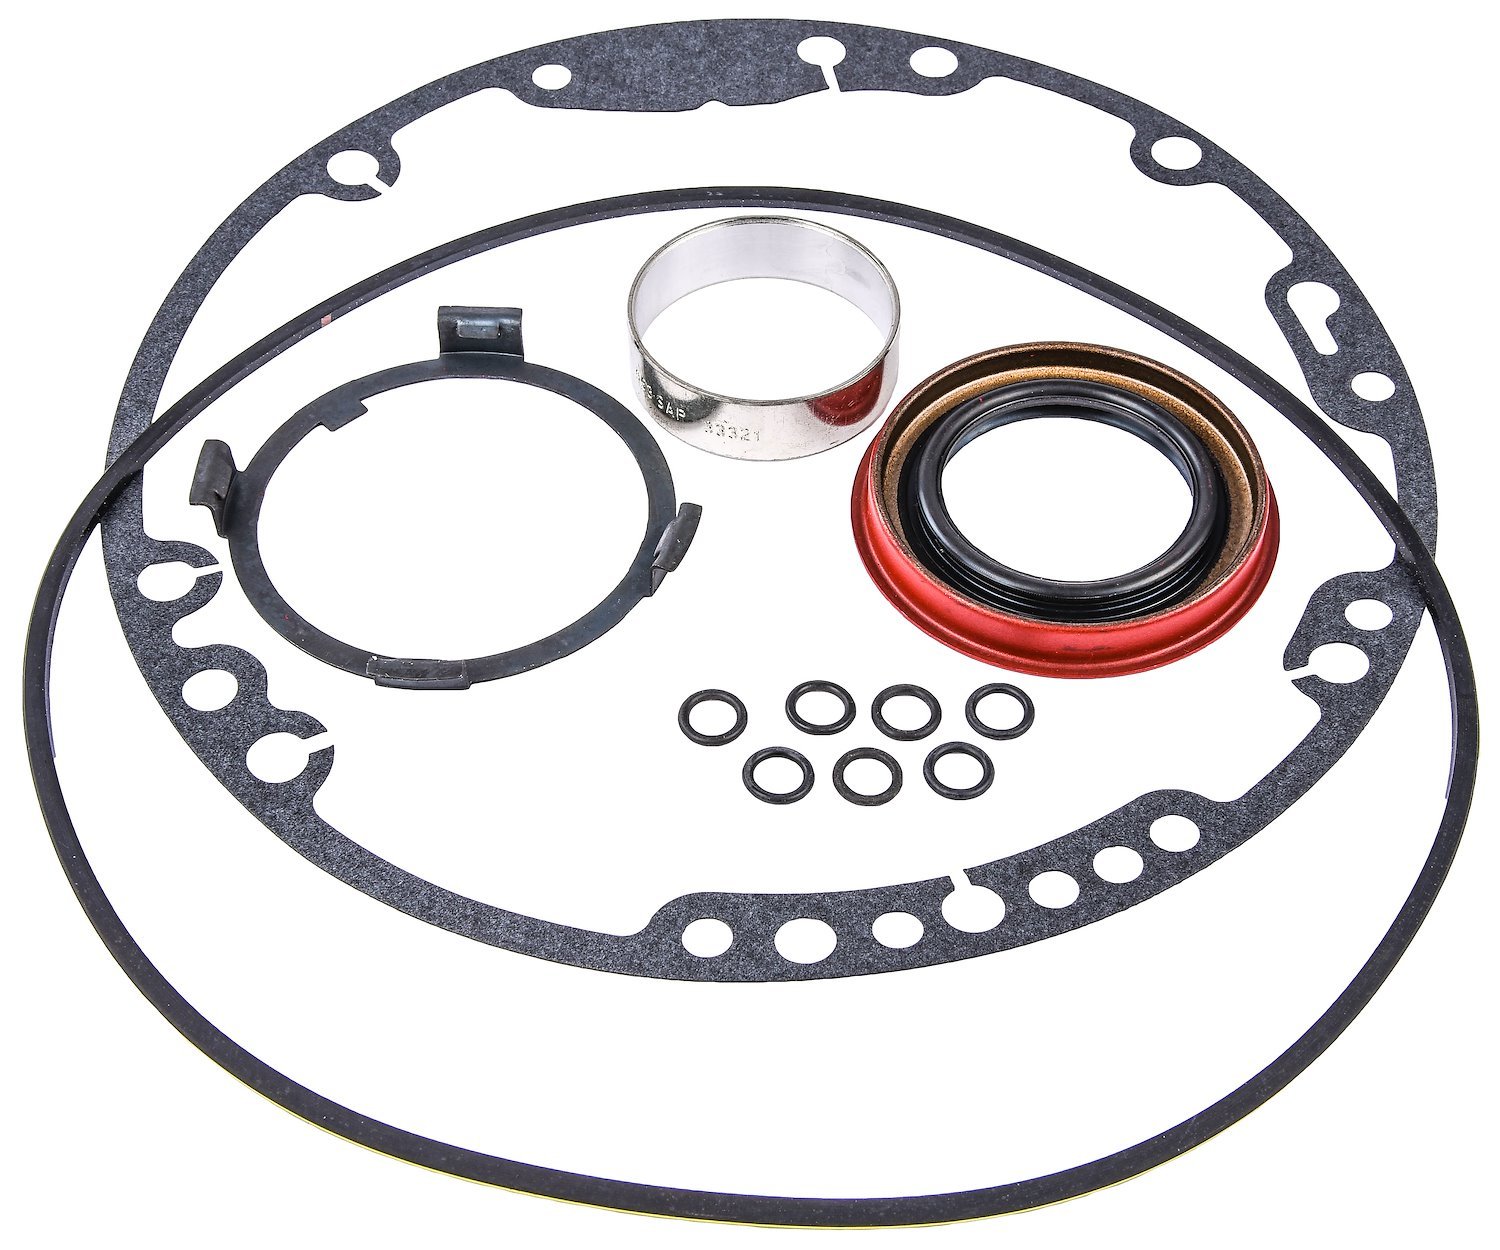 JEGS 62134: Front Pump Seal Kit for GM TH700R4 and 4L60E JEGS